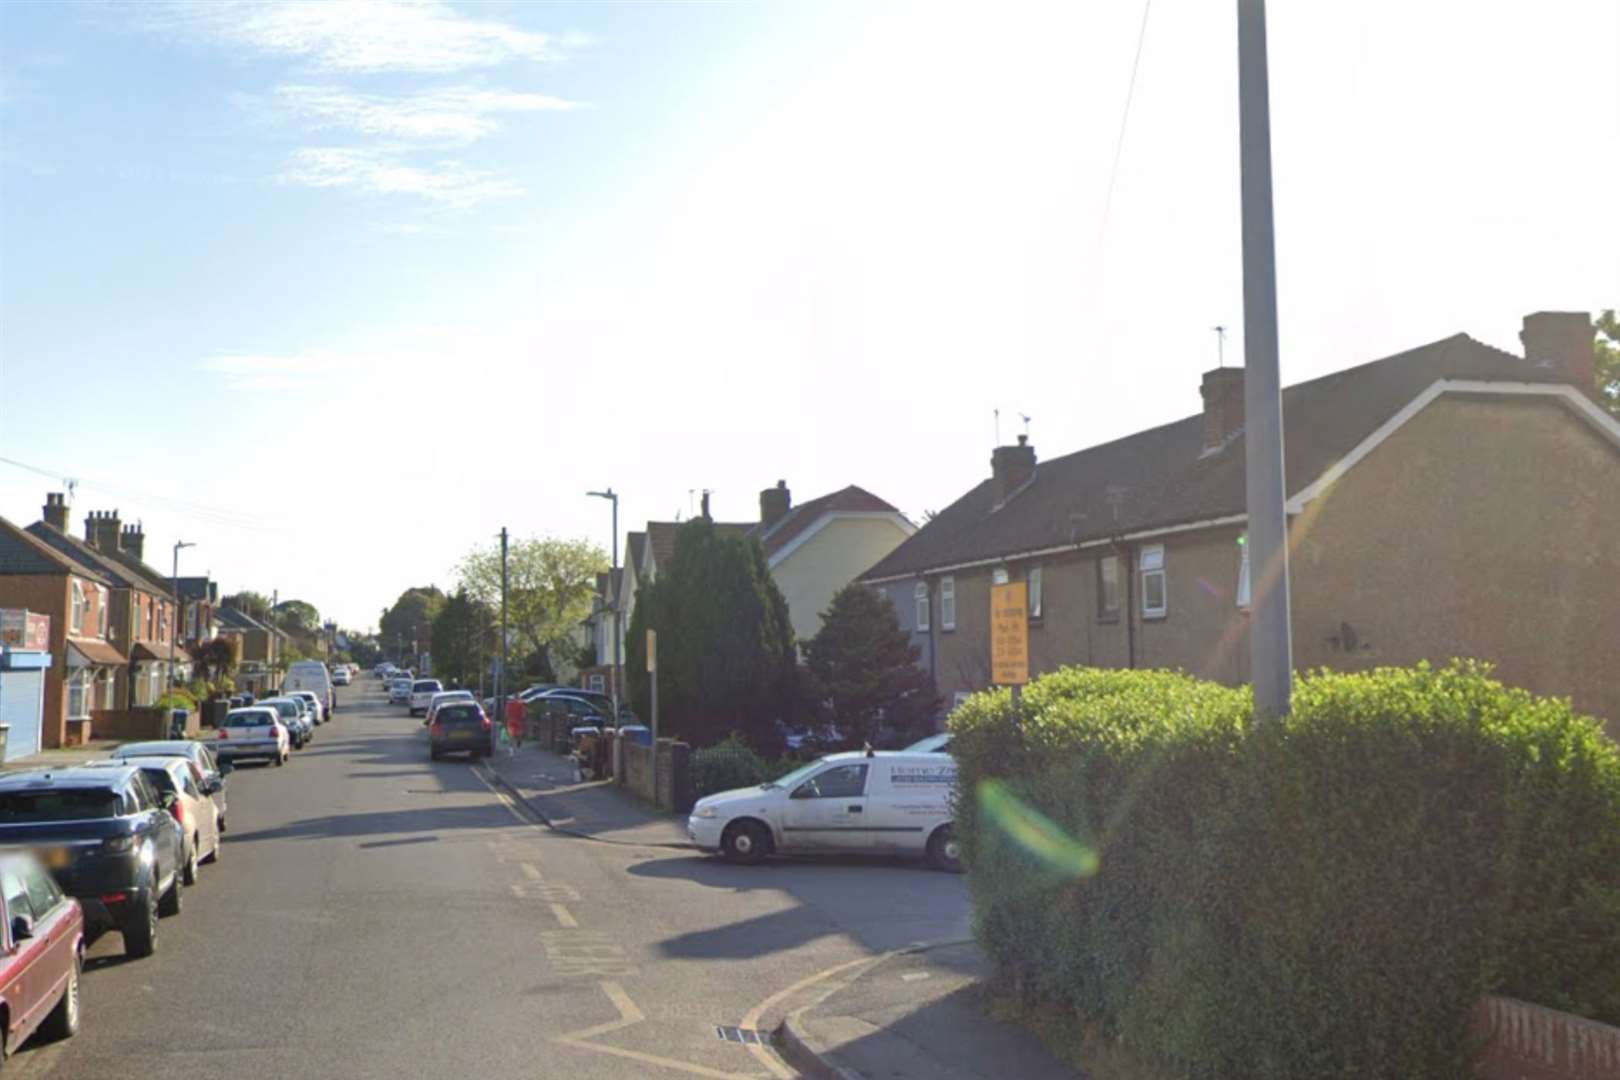 A cyclist has been taken to hospital after a collision with a vehicle in Mill Road, Deal. Picture: Google Maps